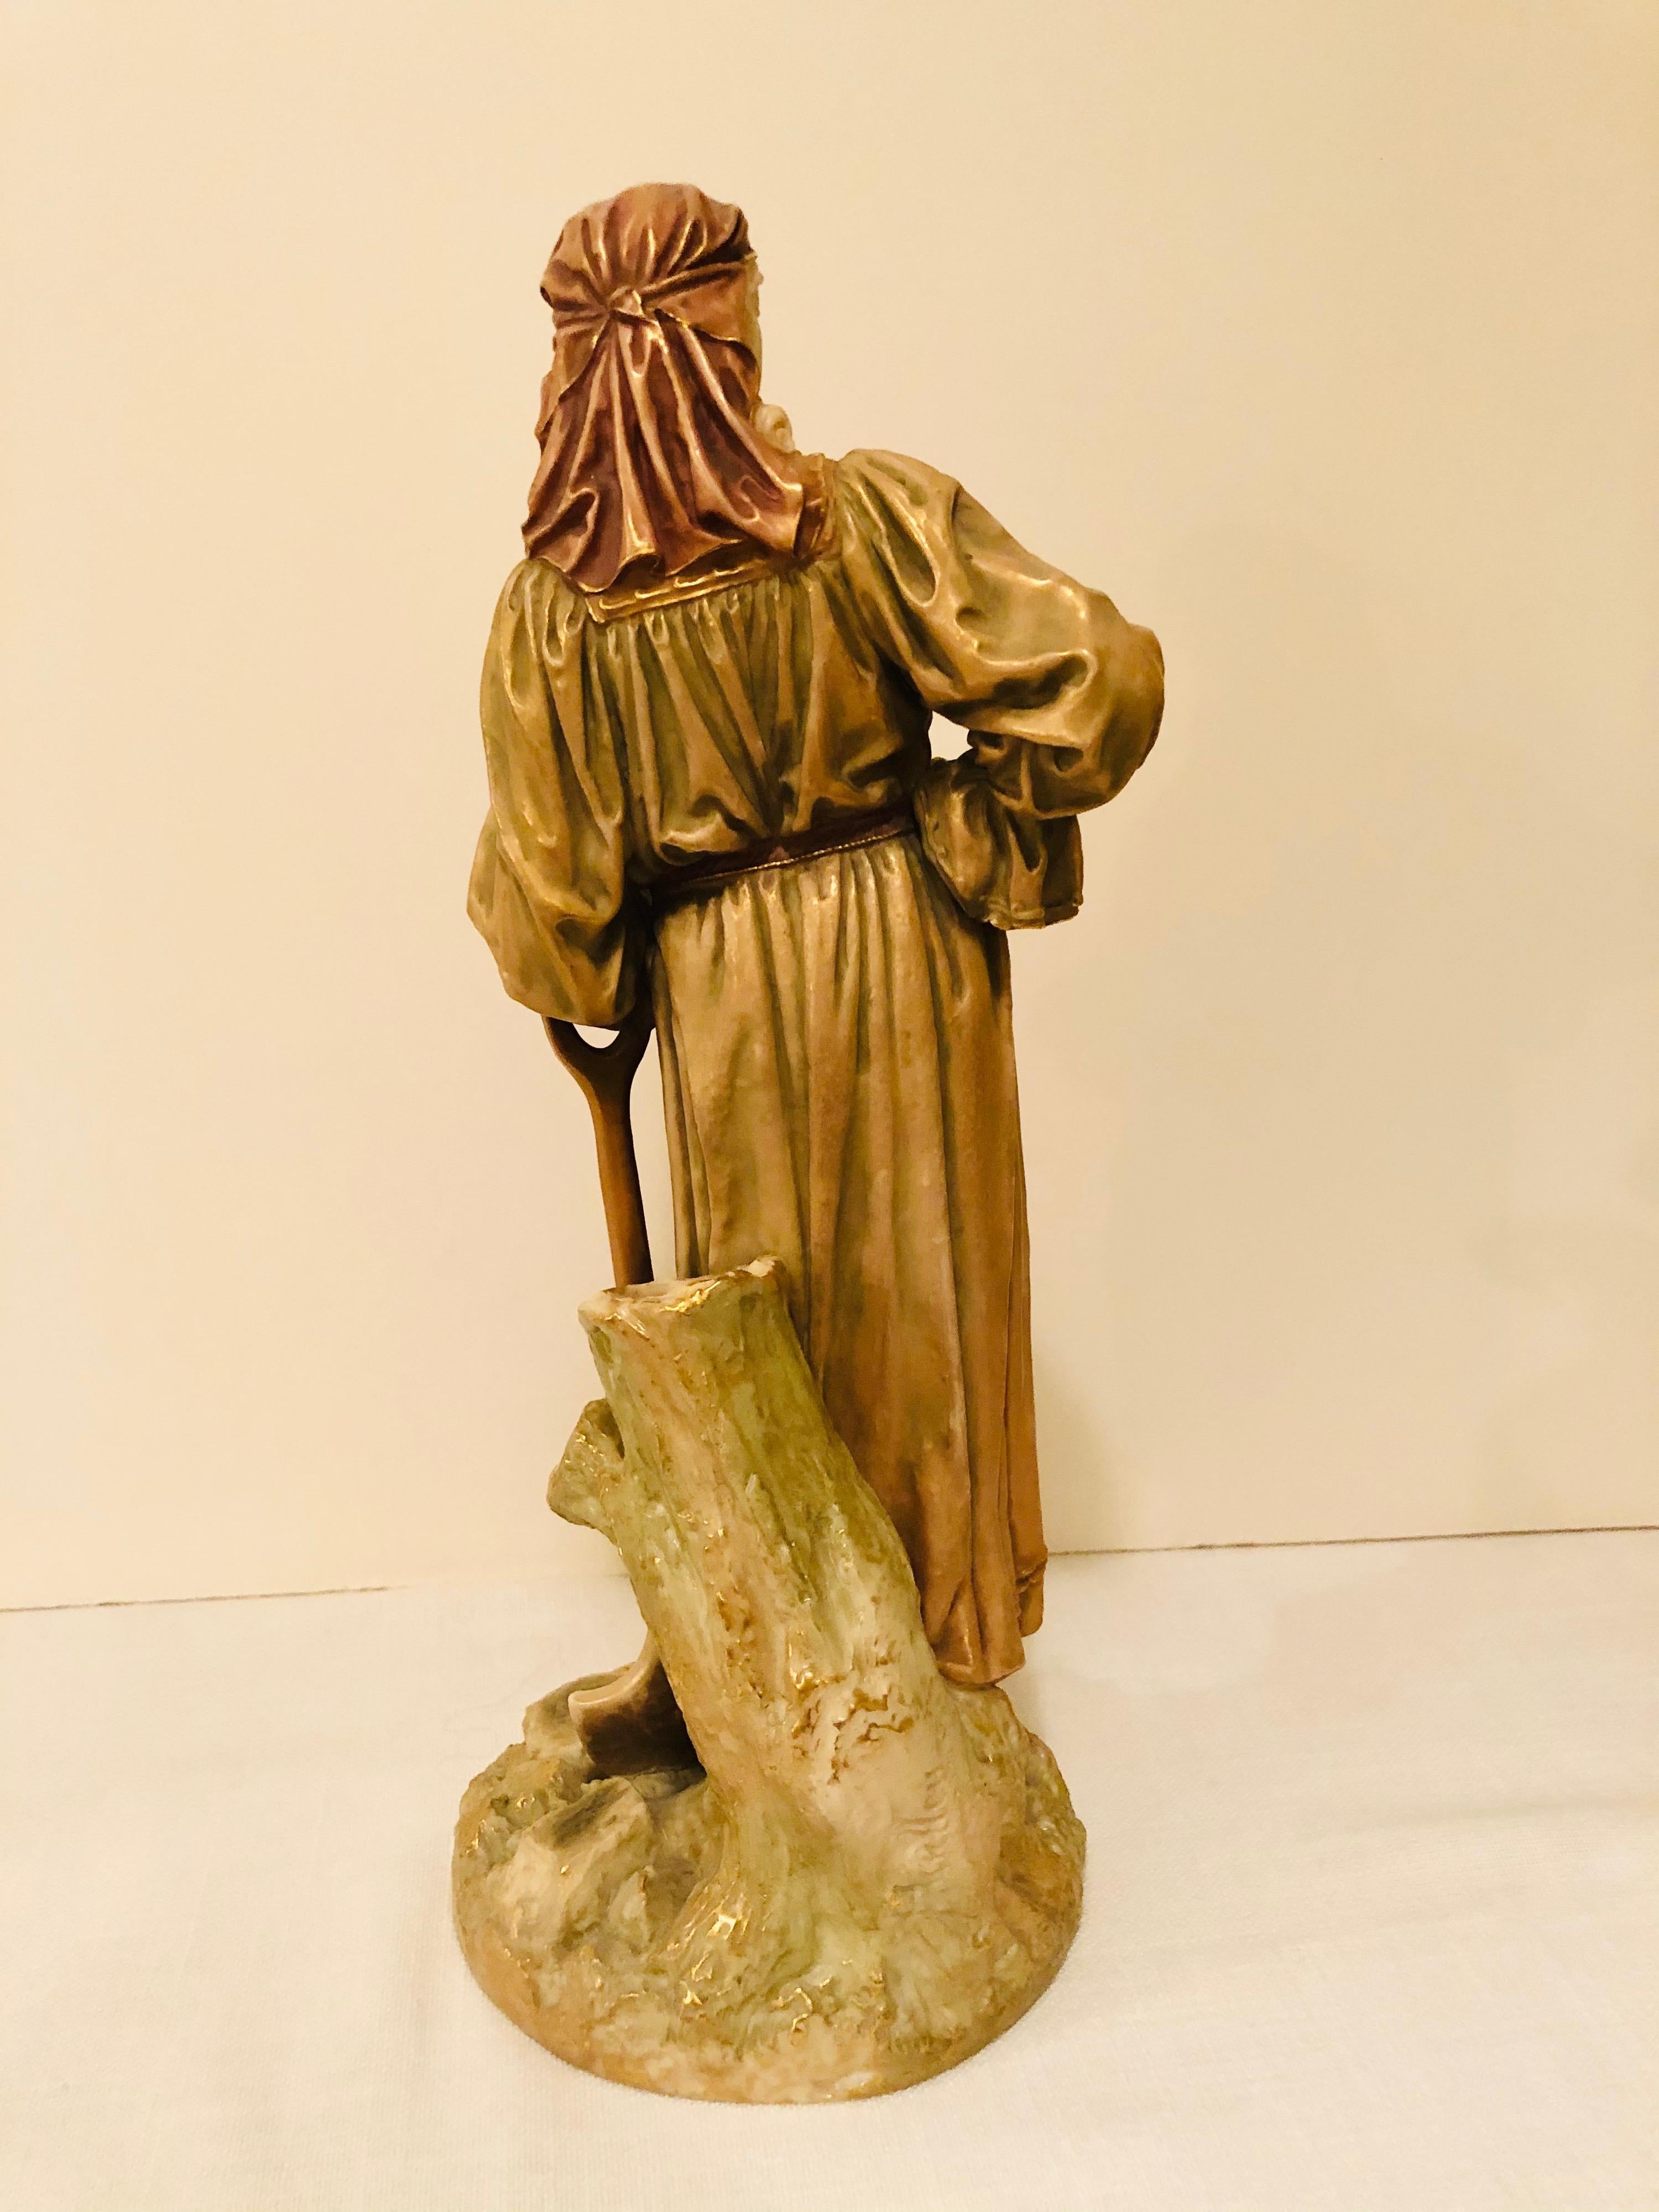 Hand-Painted Royal Worcester Figure of a Lady Gardener Wearing a Flowing Dress and Hat